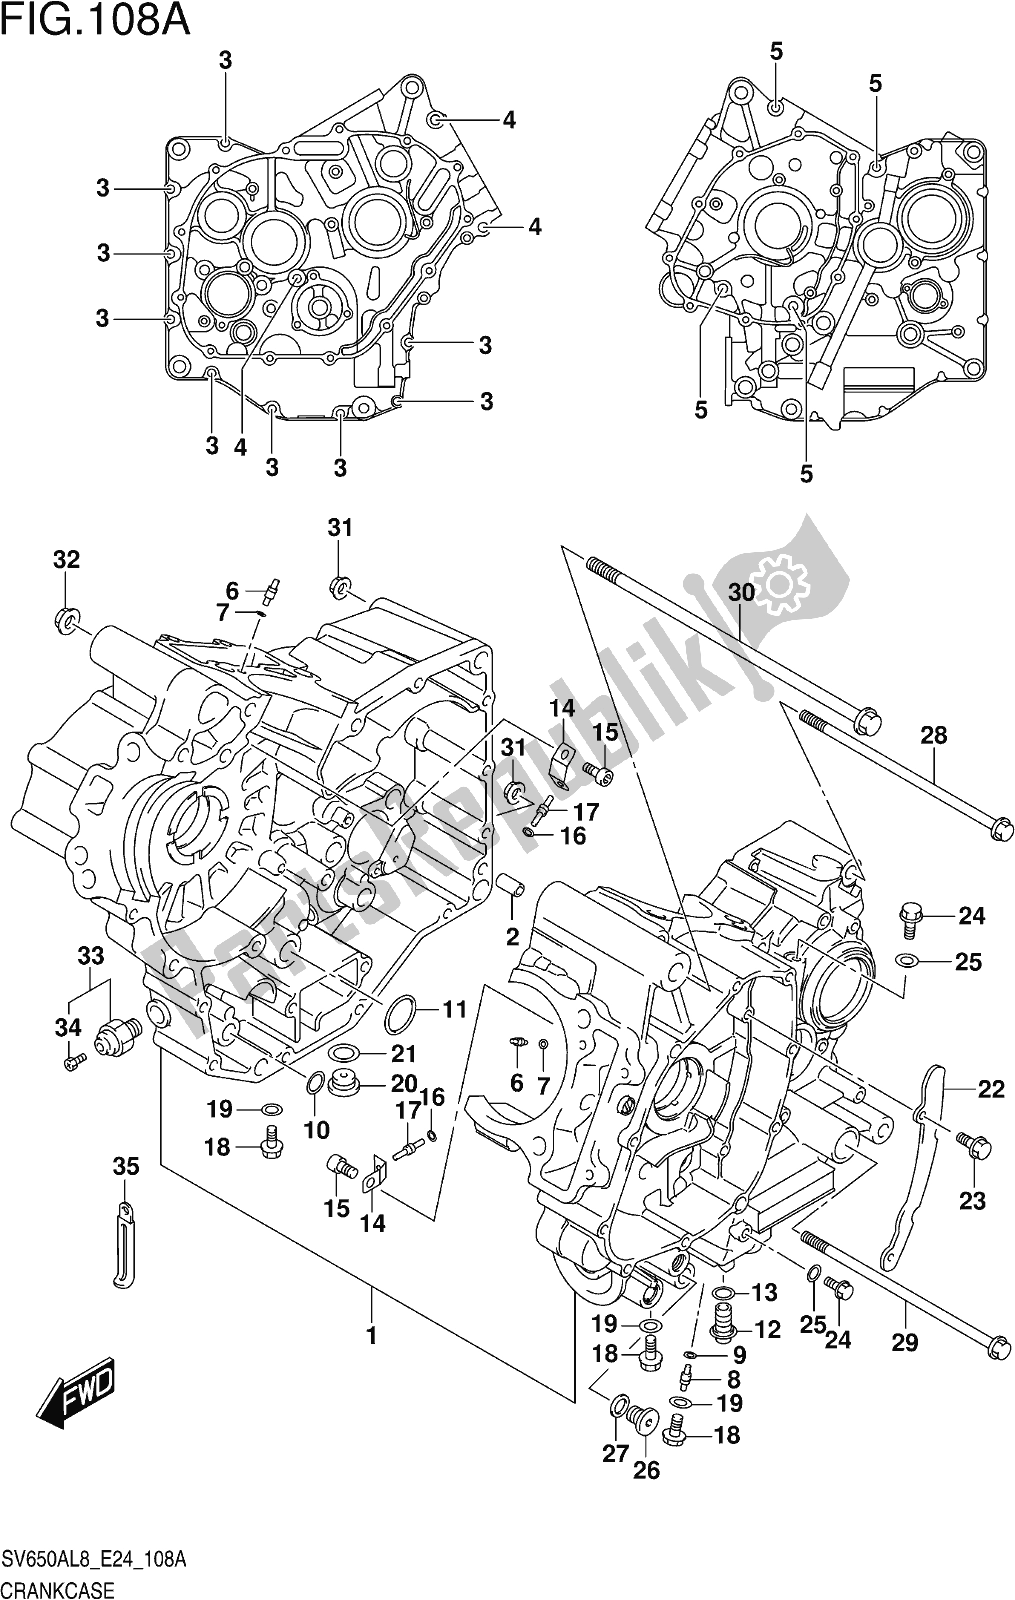 All parts for the Fig. 108a Crankcase of the Suzuki SV 650 AU 2018